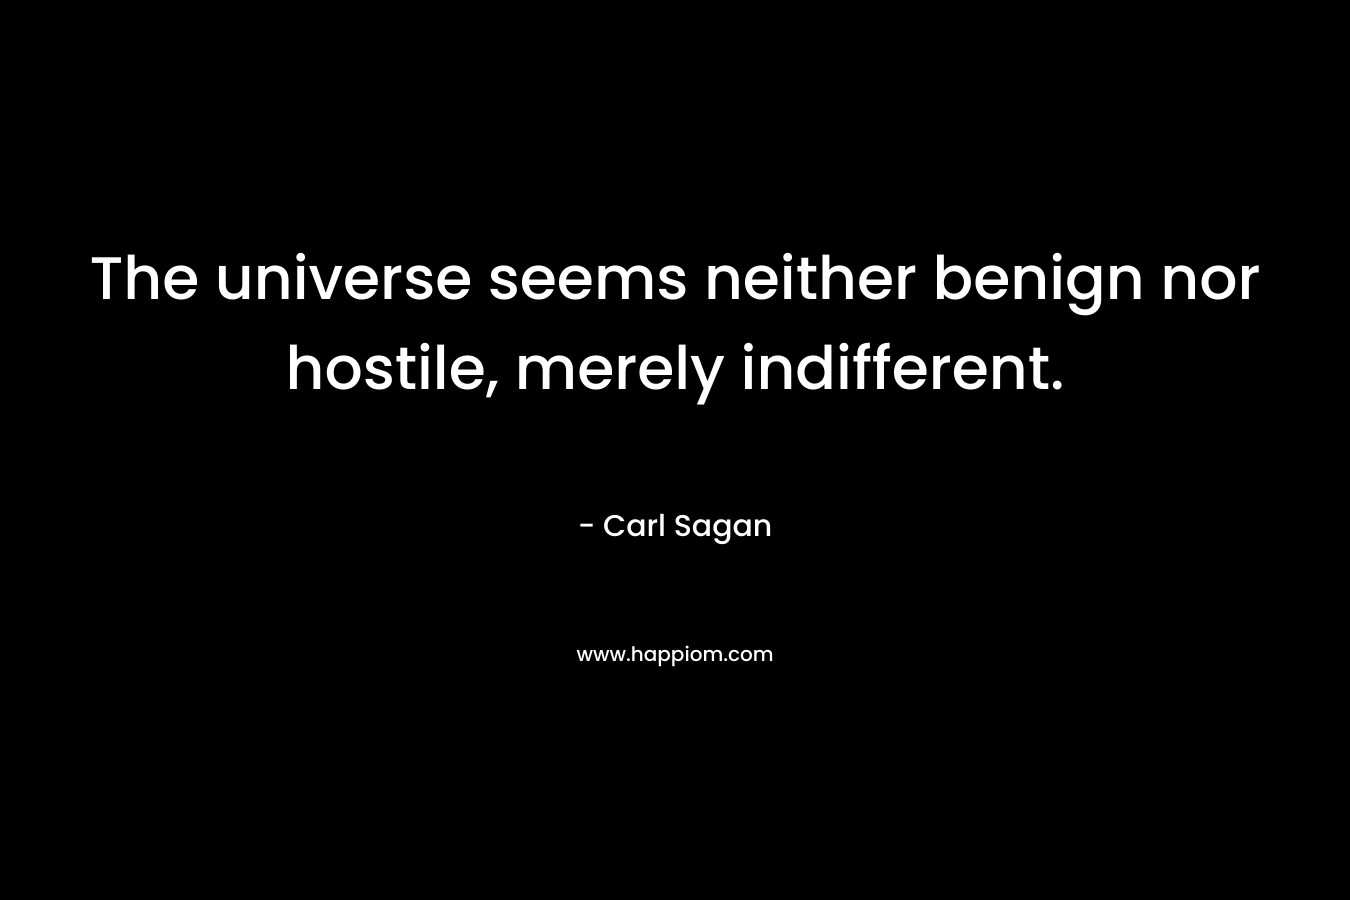 The universe seems neither benign nor hostile, merely indifferent. – Carl Sagan